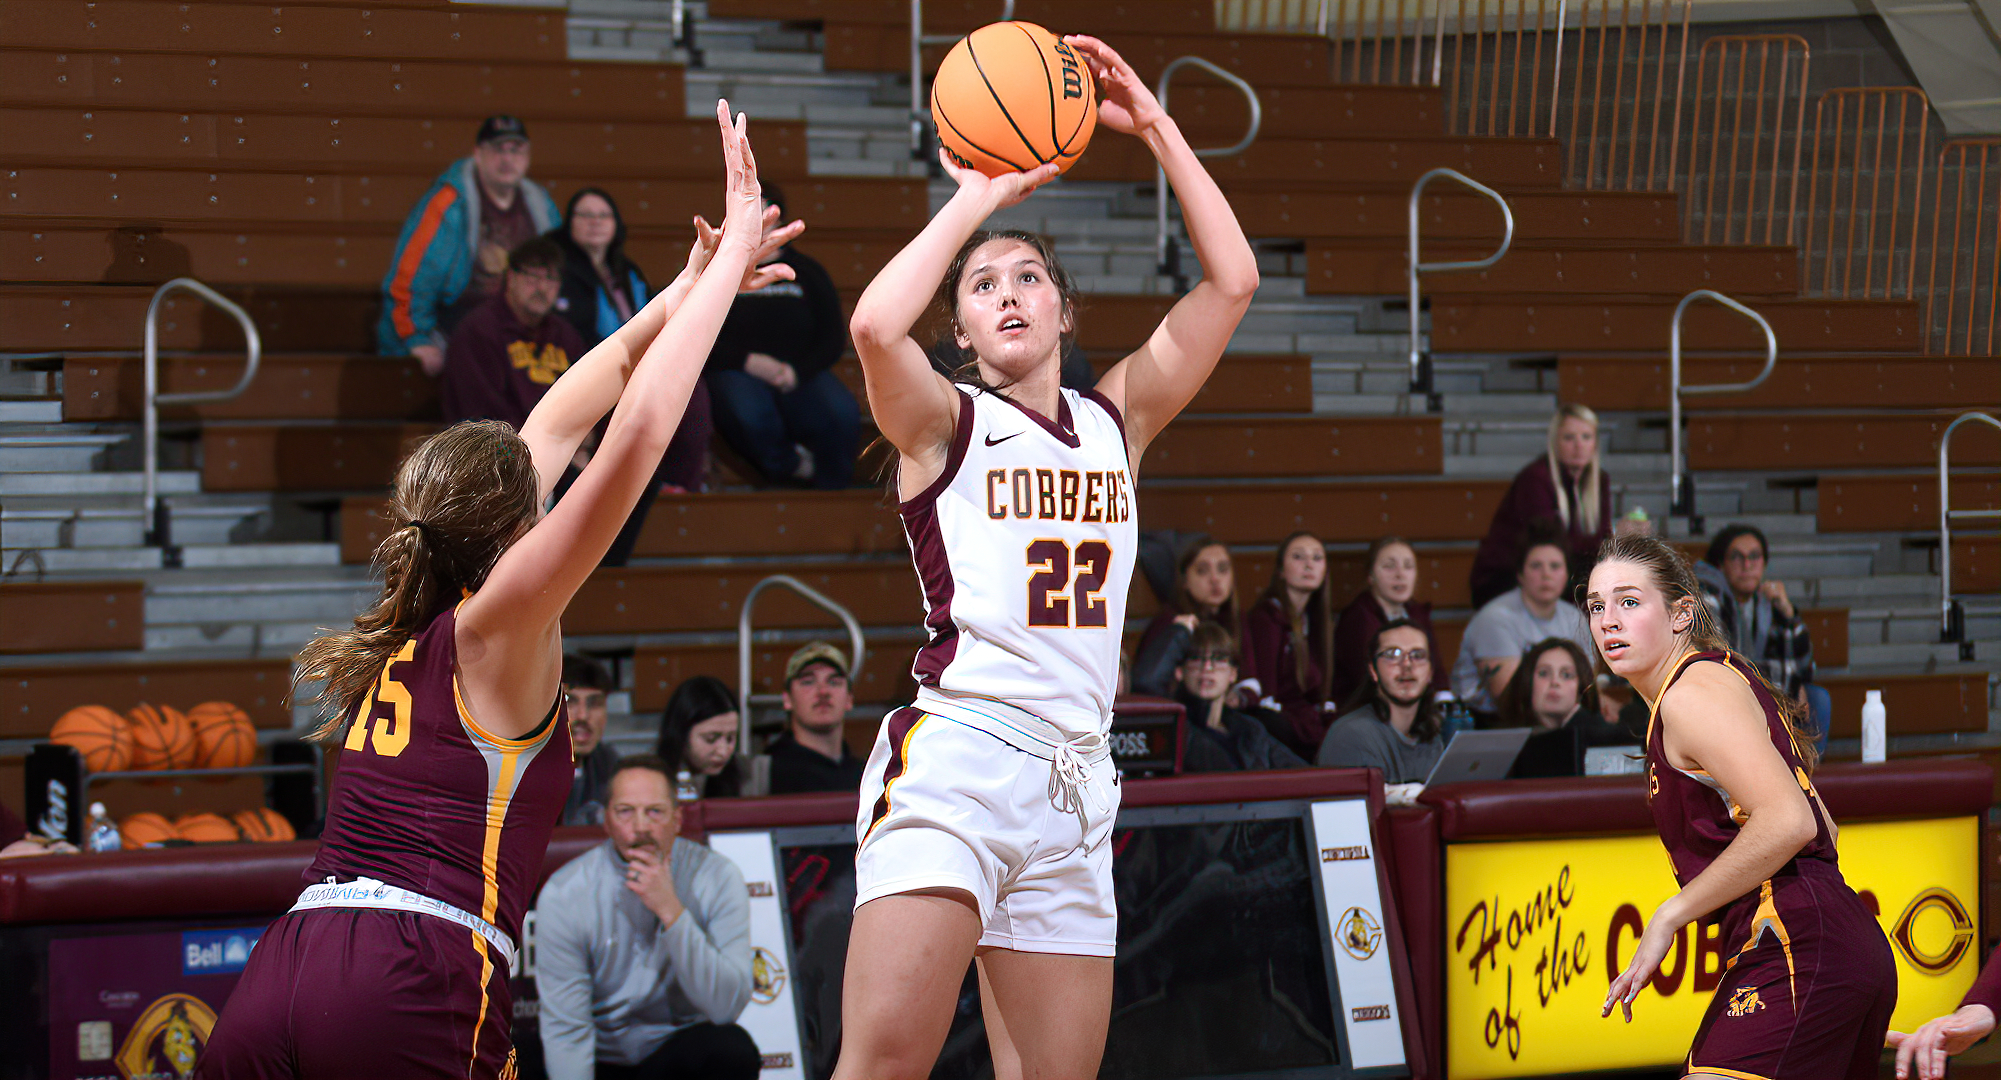 Makayla Anderson scored 11 points and grabbed 10 rebounds to record her second double-double of the year in the Cobbers' game at Bethel.